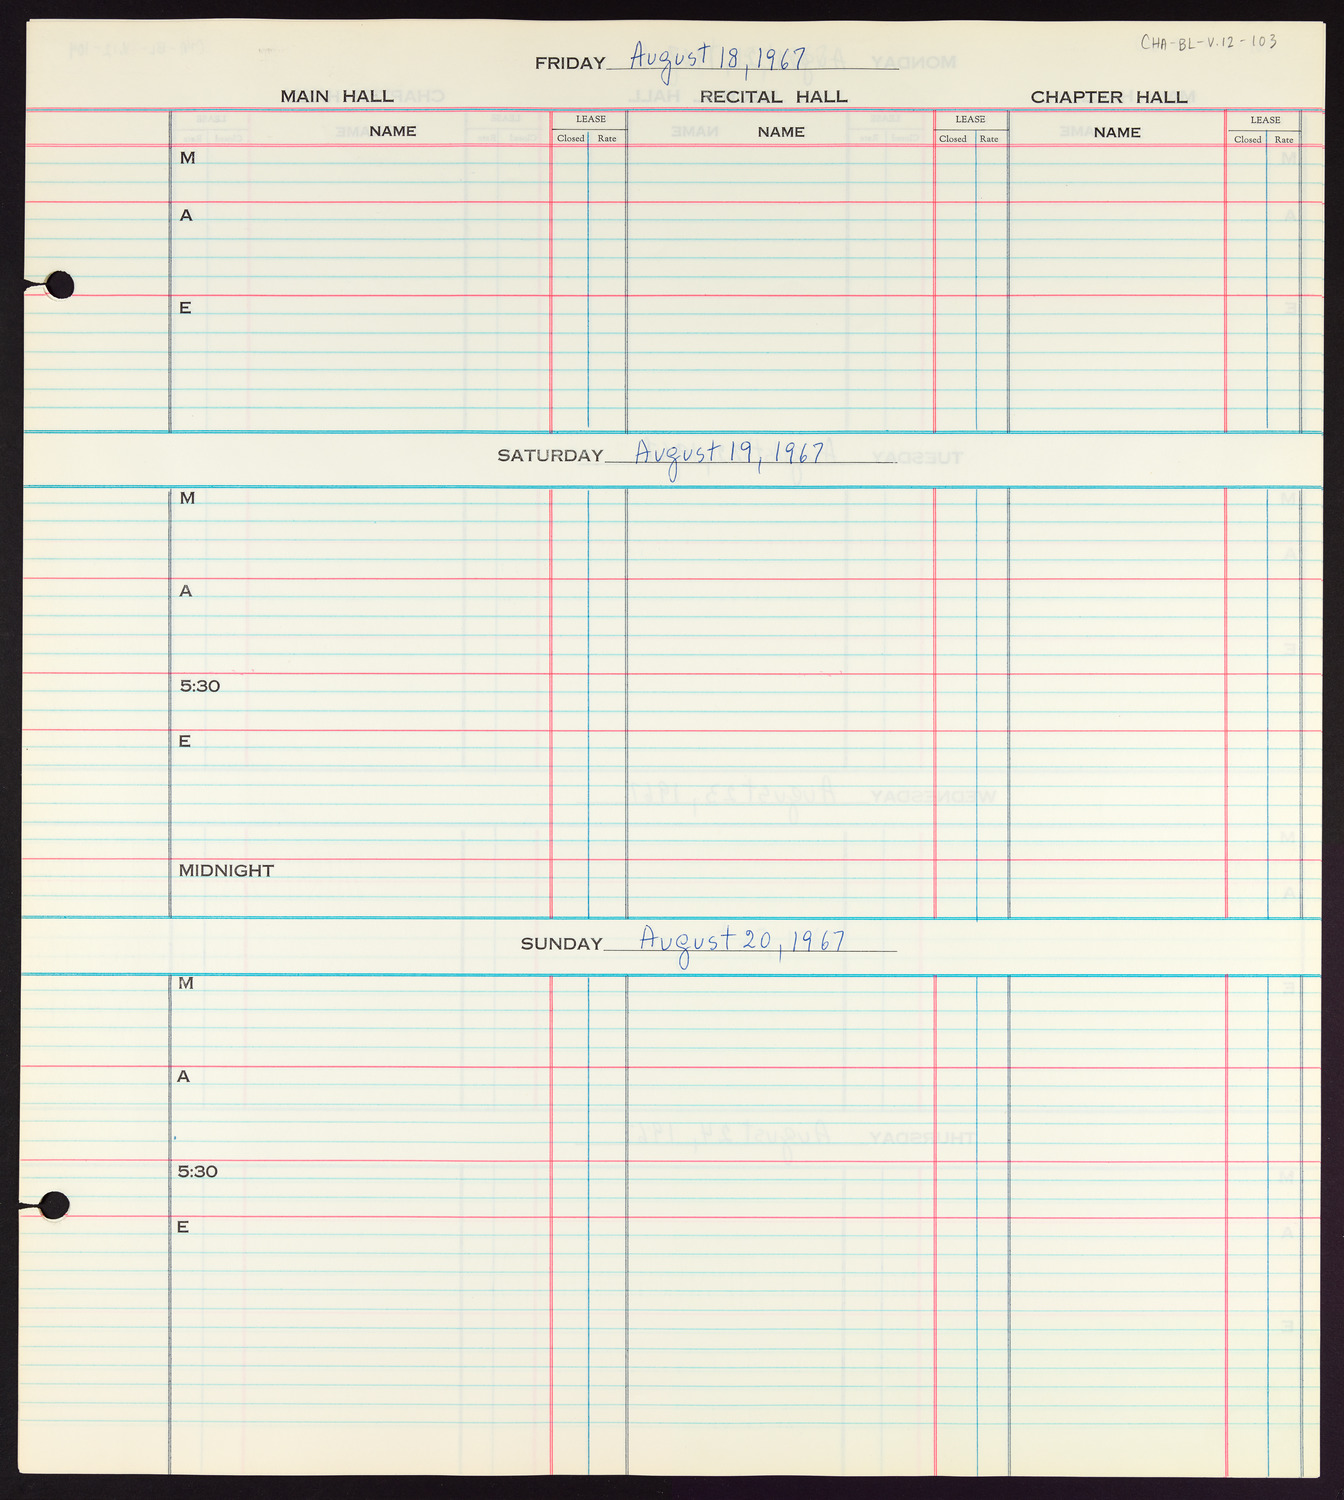 Carnegie Hall Booking Ledger, volume 12, page 103